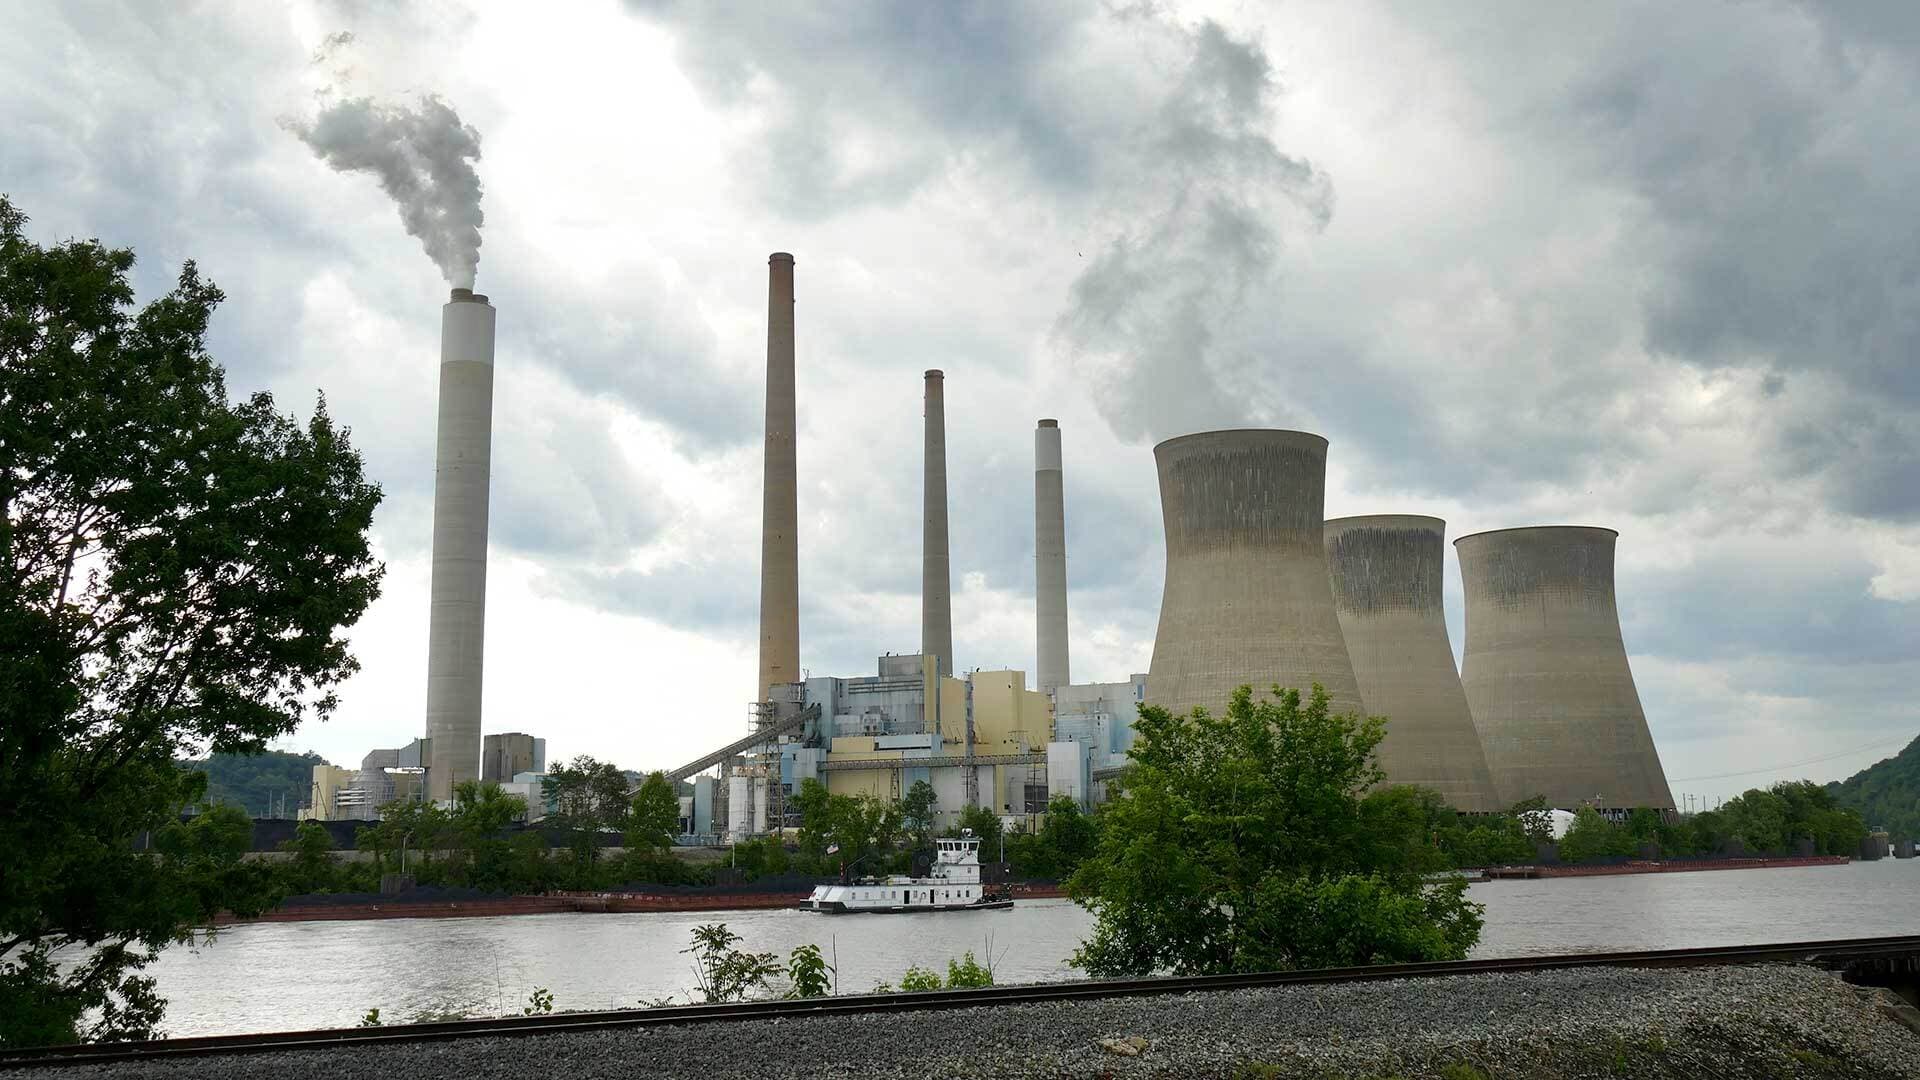 Steam rises from cooling towers at power plant